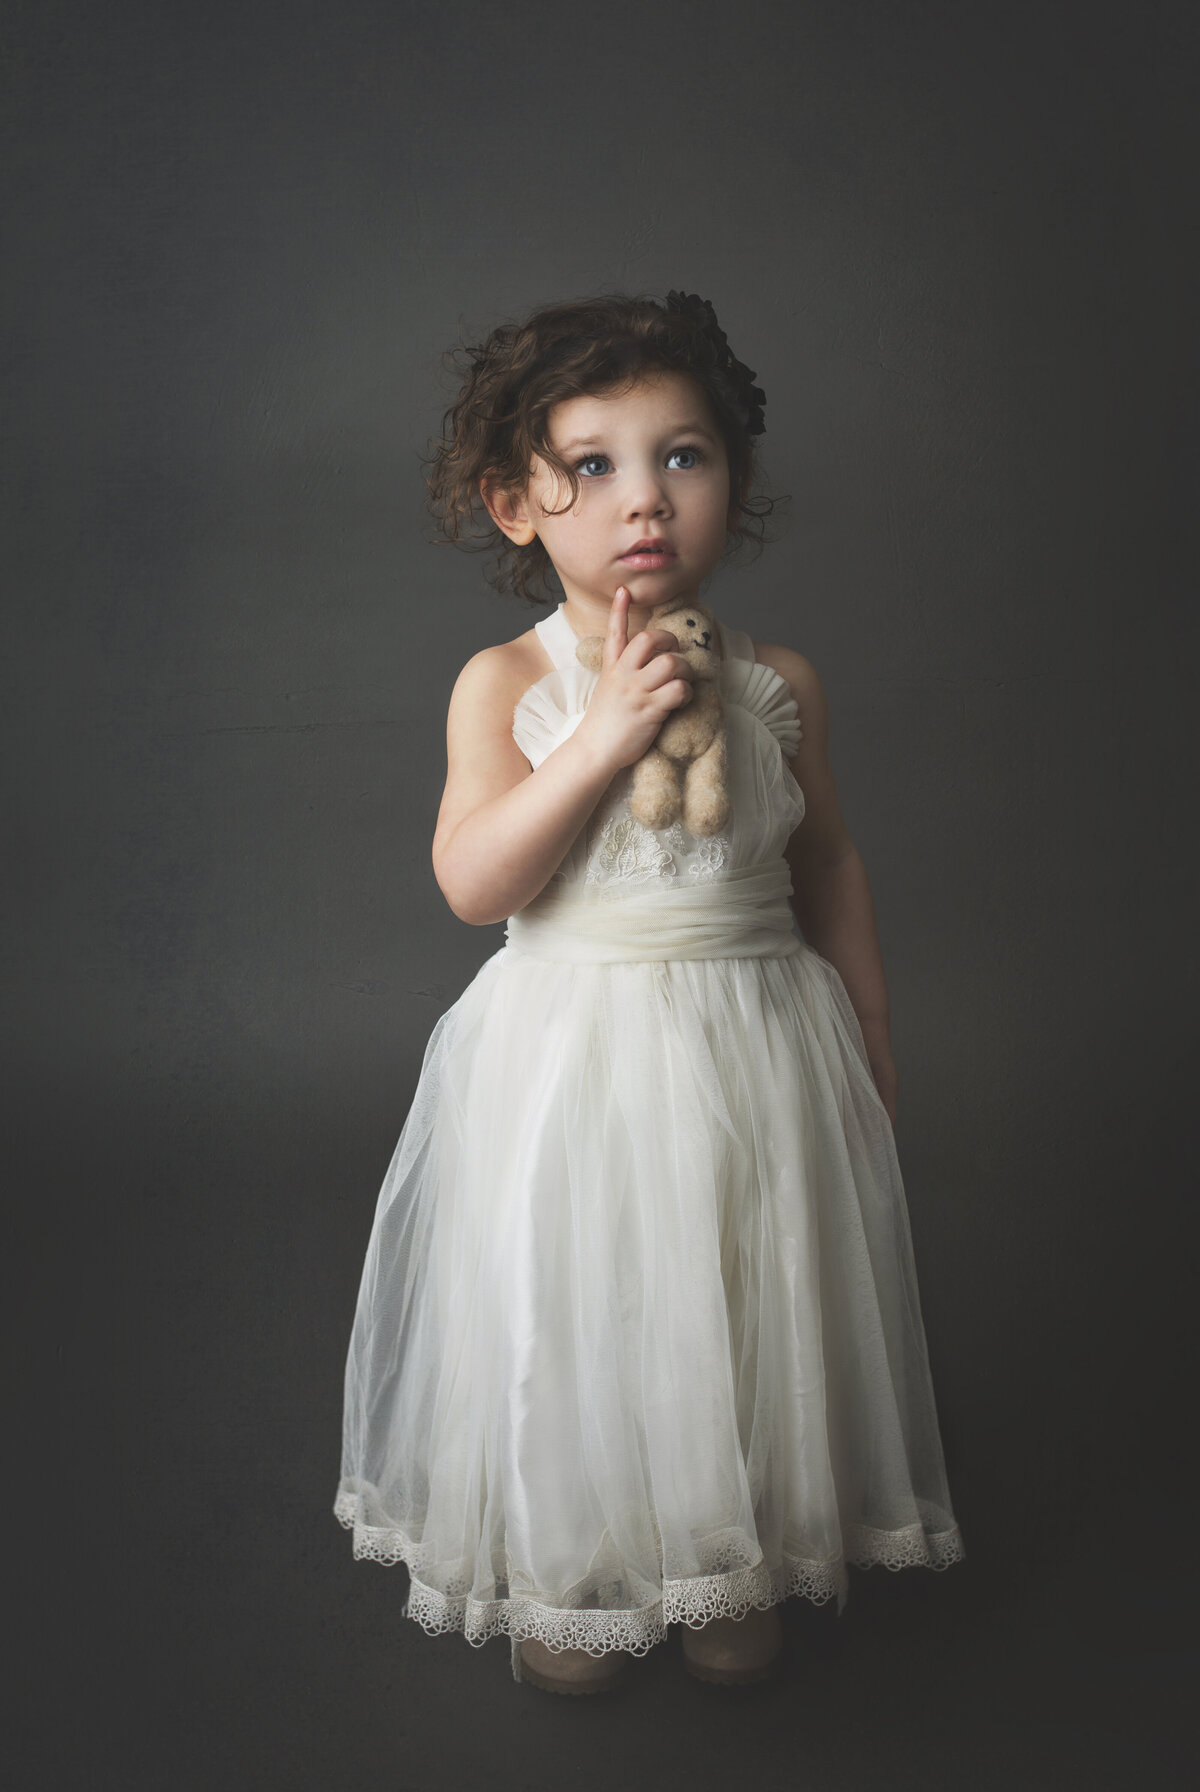 Toddler girl standing in white dress with grey background, holding a teddy bear